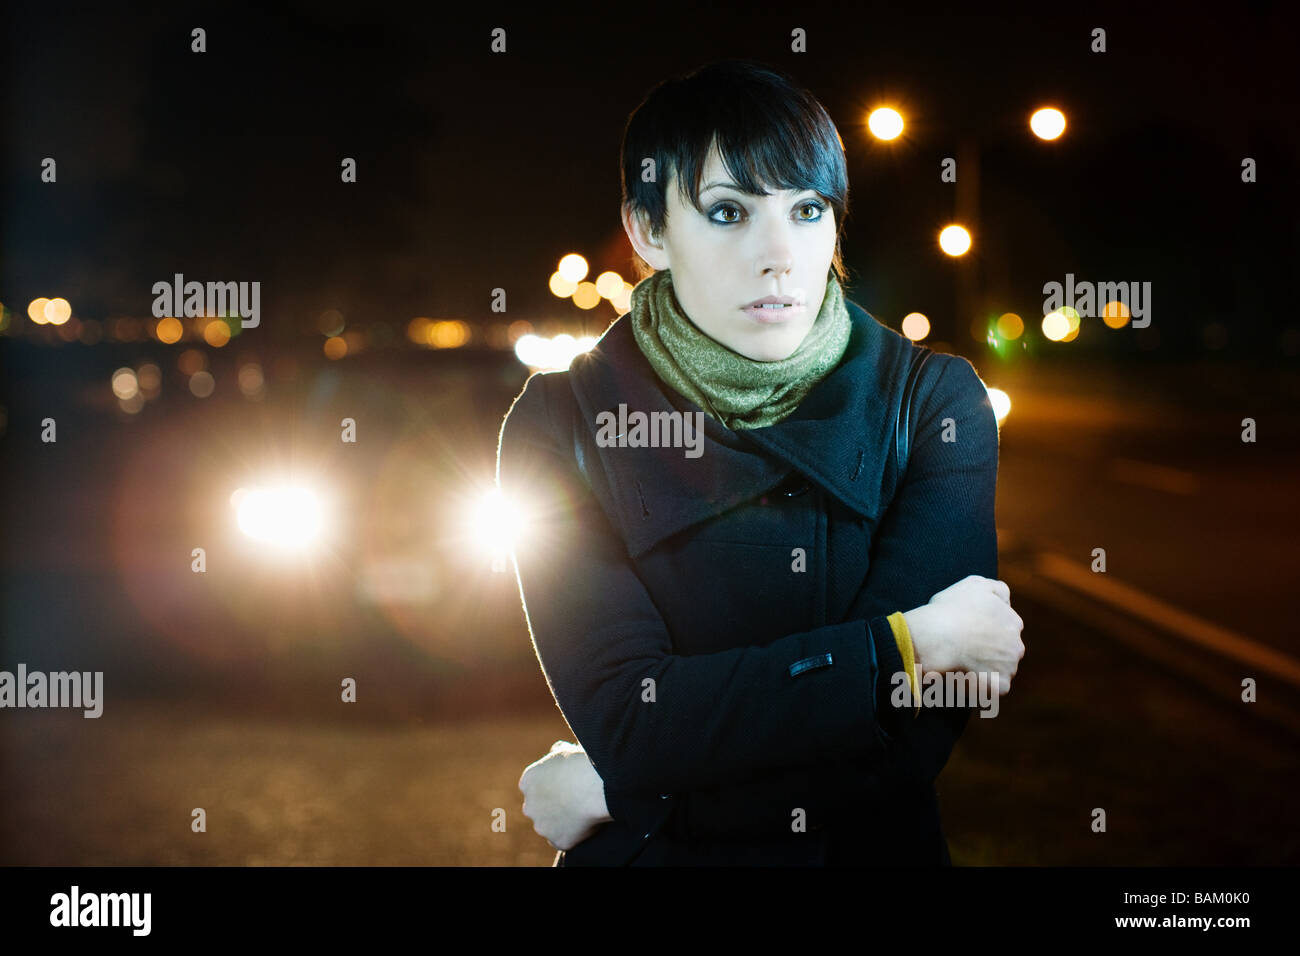 Woman on road at night Stock Photo